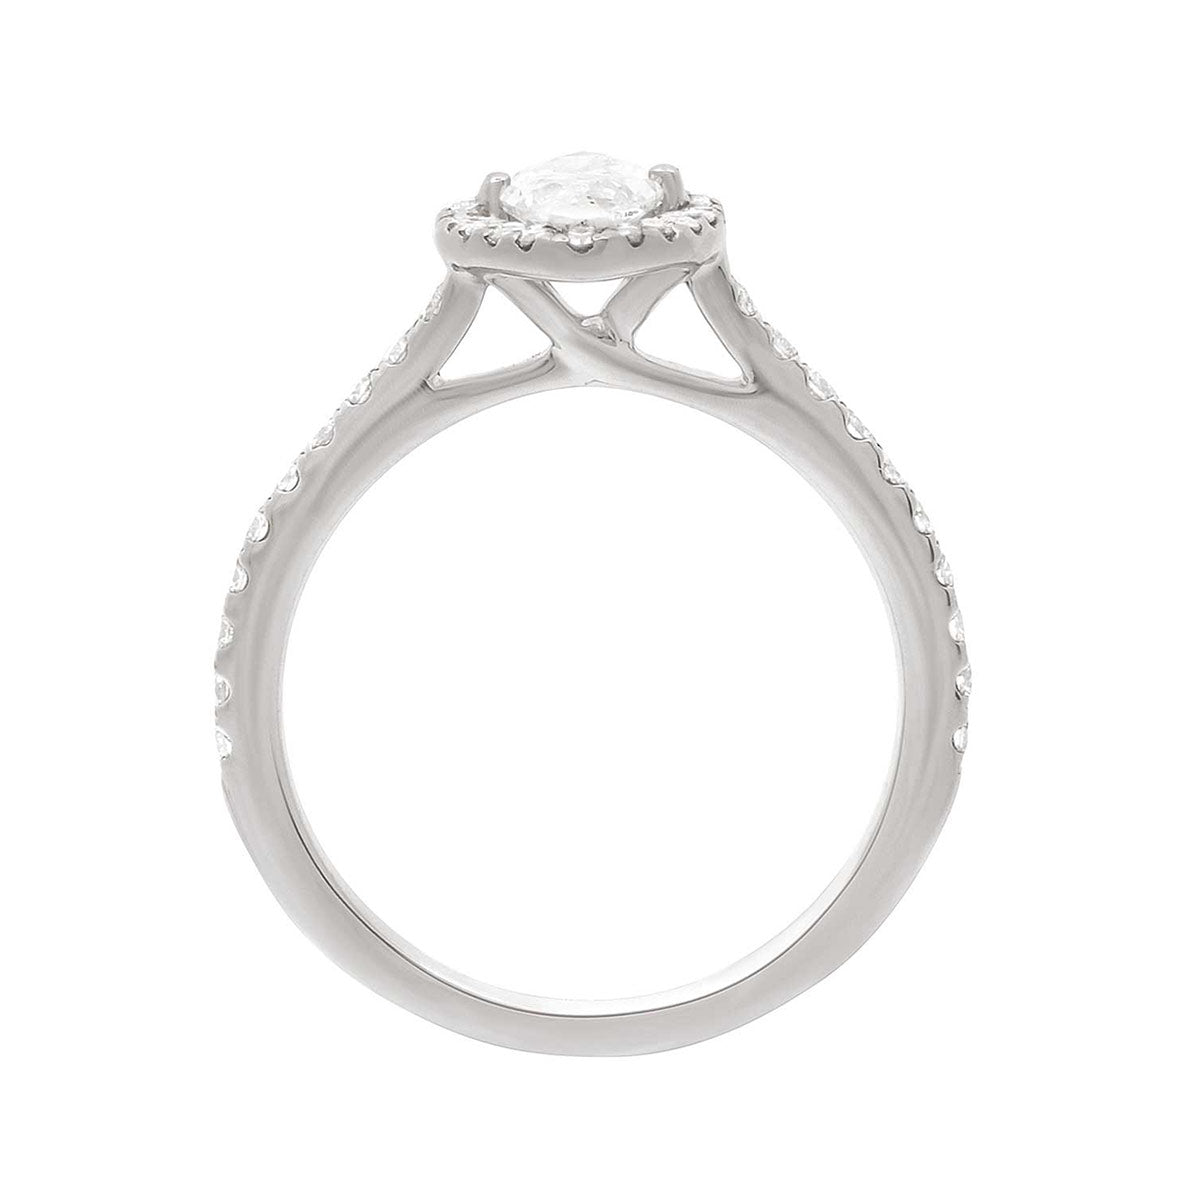 Marquise Halo Engagement Ring in White Gold Standing upright